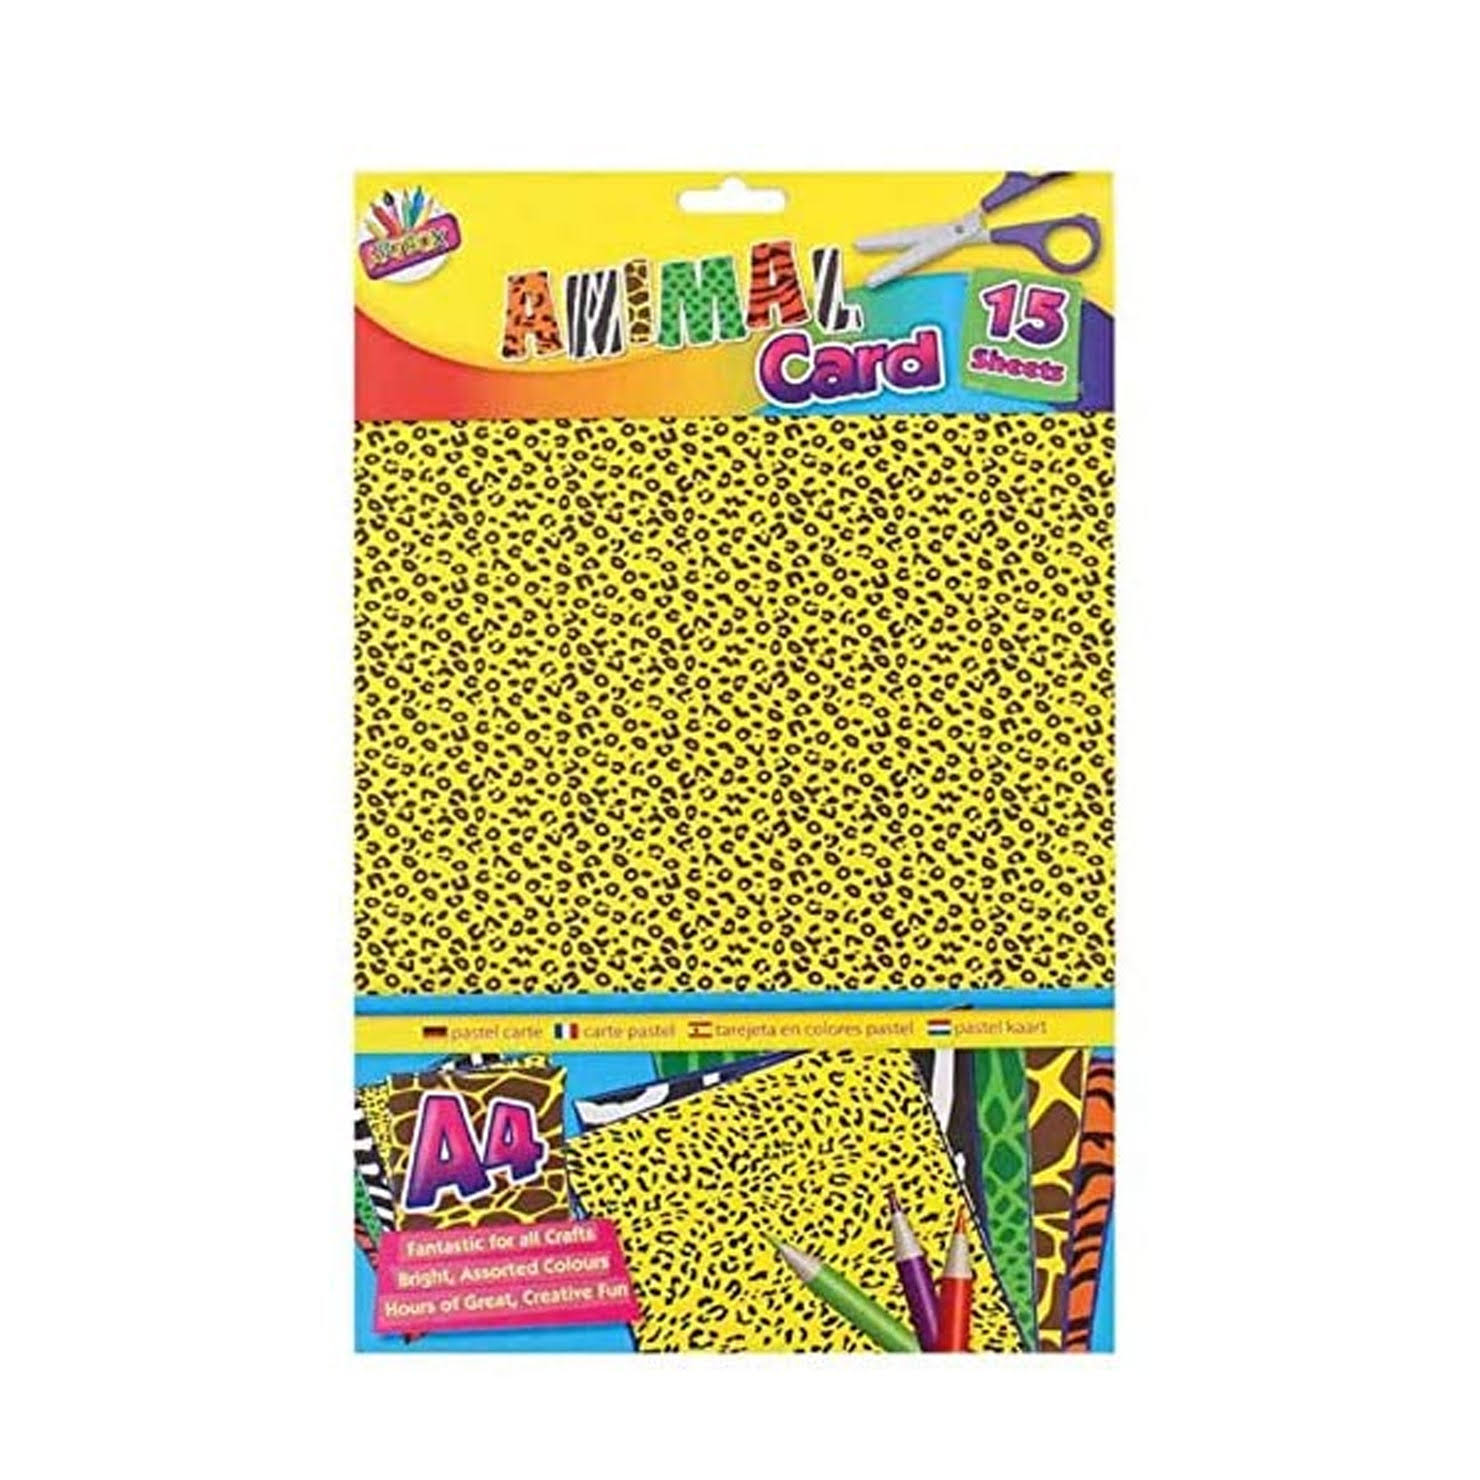 Pack of 15 A4 Assorted Animal Print Card Sheets